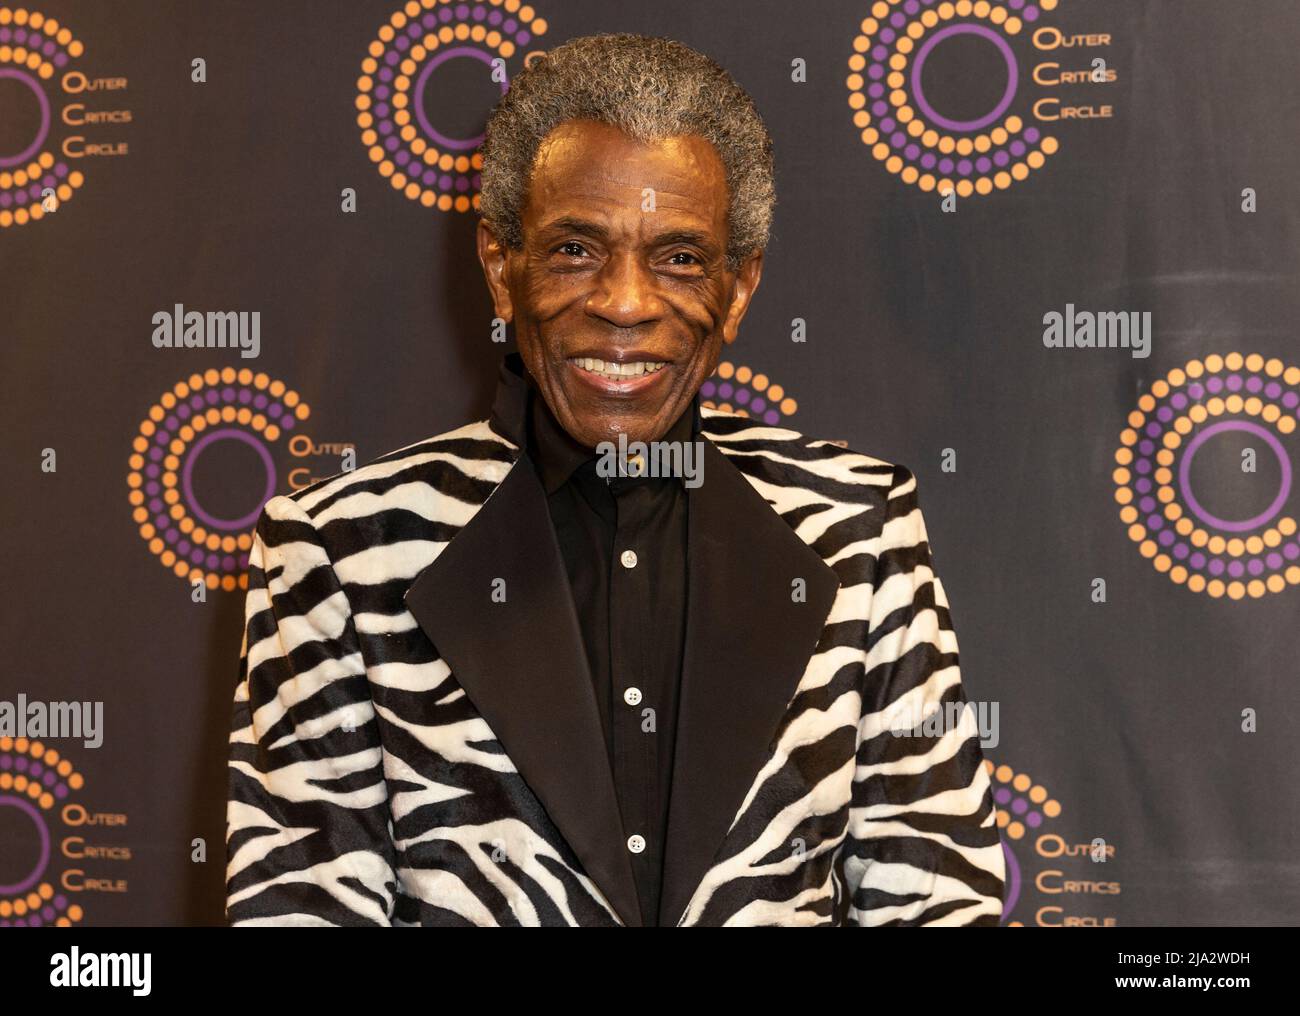 New York, USA. 26th May, 2022. Andre De Shields attends 71st Annual Outer Critics Circle Awards at New York Public Library for the Performing Arts on May 26, 2022. (Photo by Lev Radin/Sipa USA) Credit: Sipa USA/Alamy Live News Stock Photo